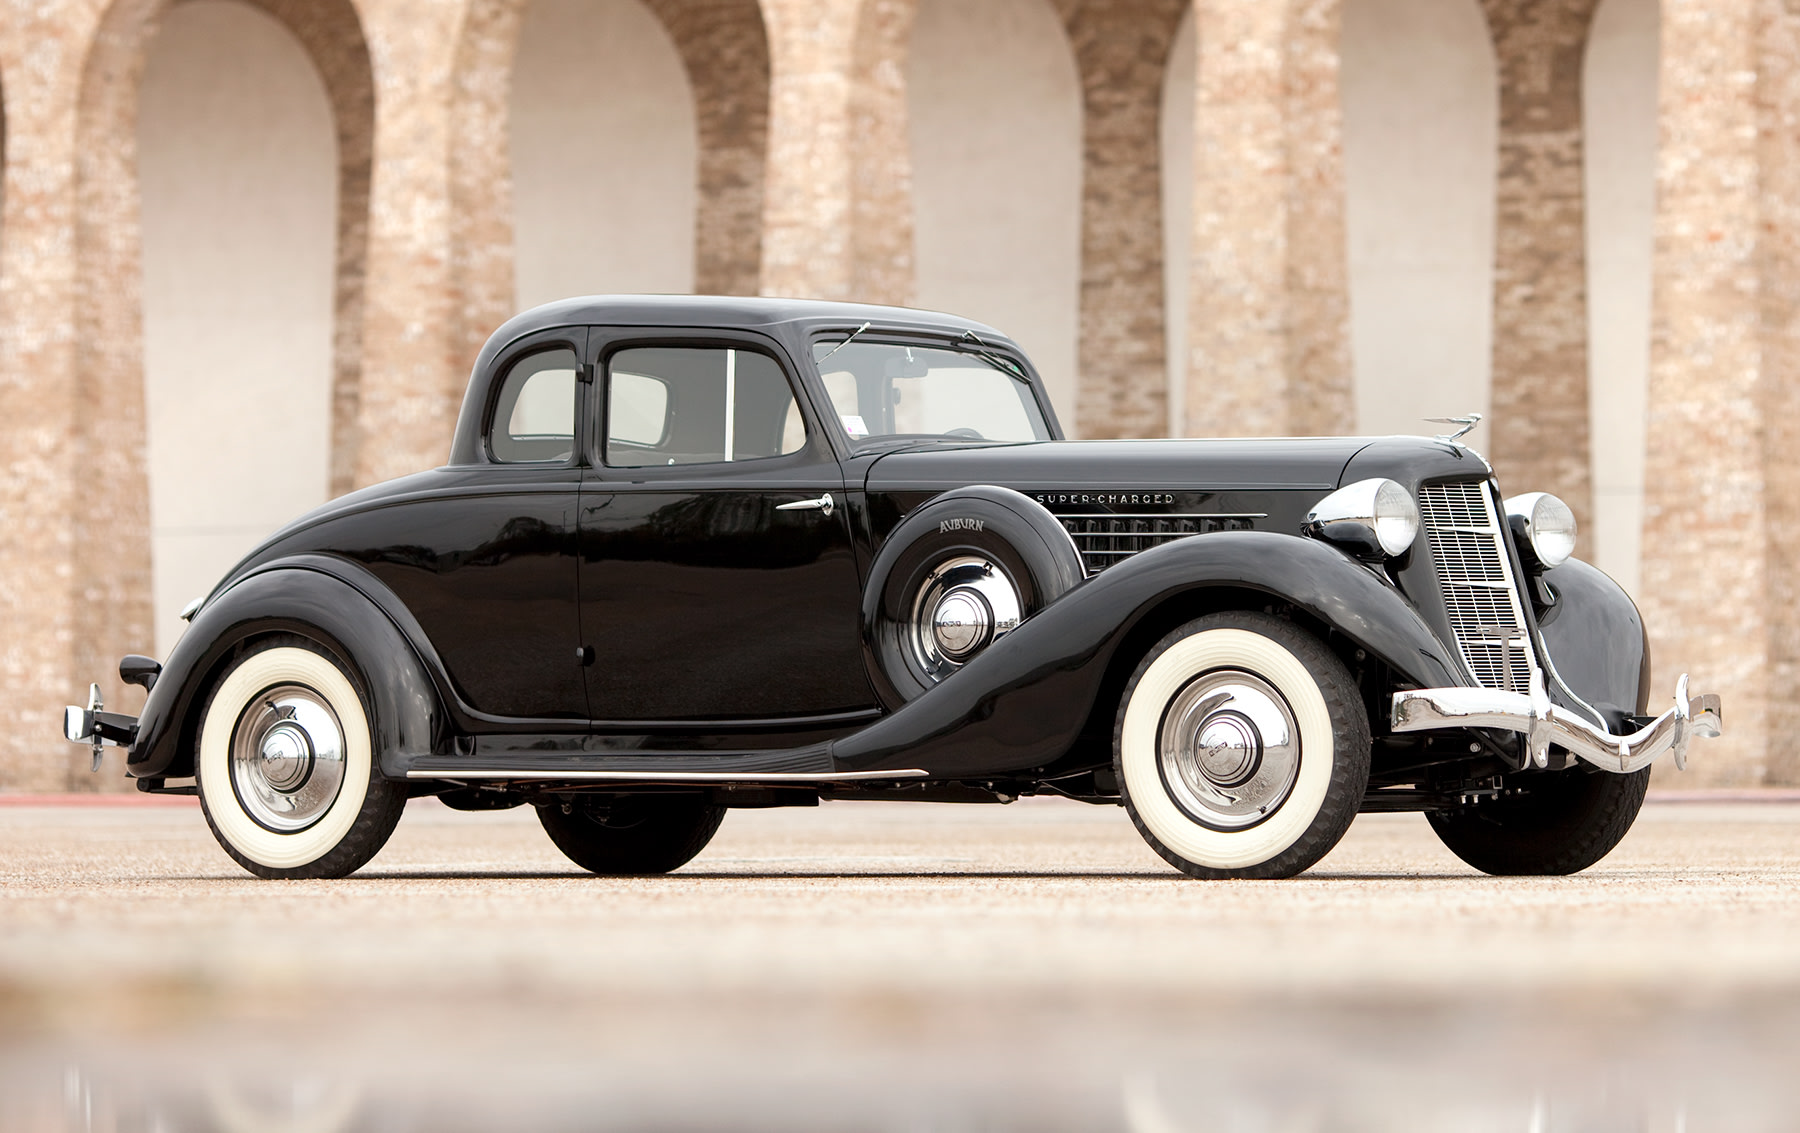 1935 Auburn 851 Supercharged Sport Coupe | Gooding & Company